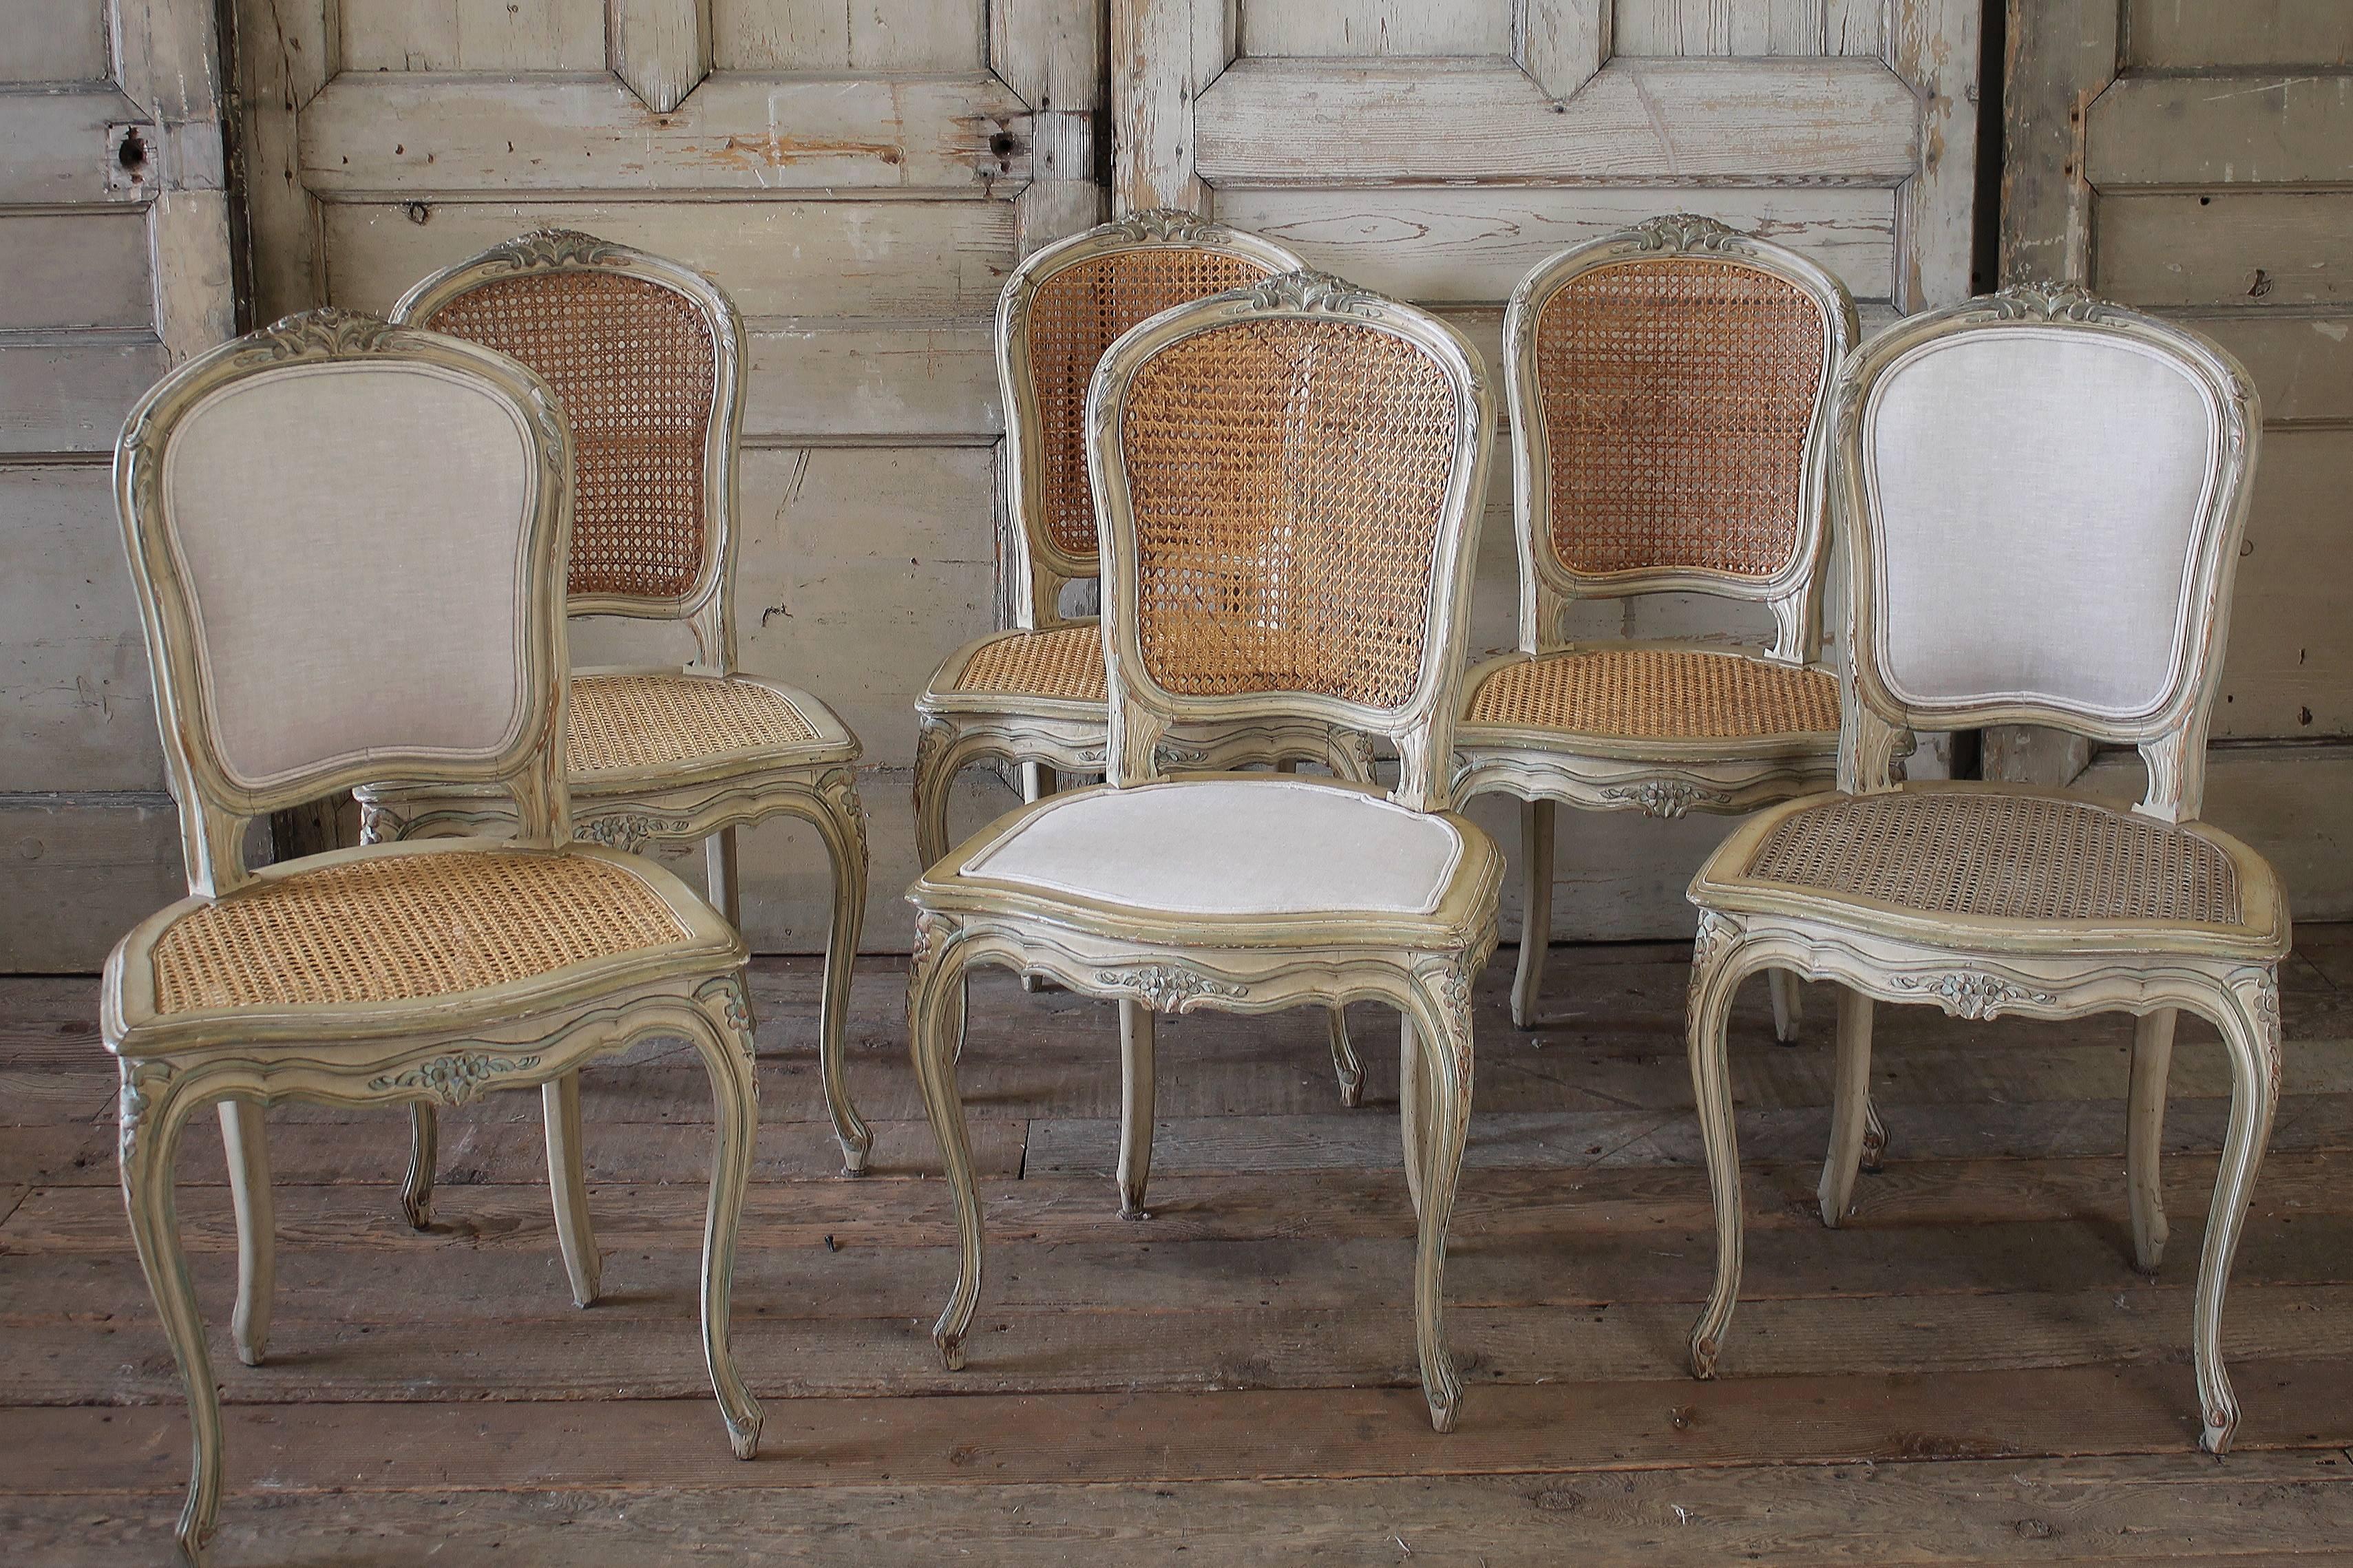 Beautiful set of six side dining chairs. There are two upholstered back end chairs and four Frenc cane side chairs. All of the chairs have new slip covers with a ruffle and ballet tie leg. The upholstery and slip covers have been done in a soft